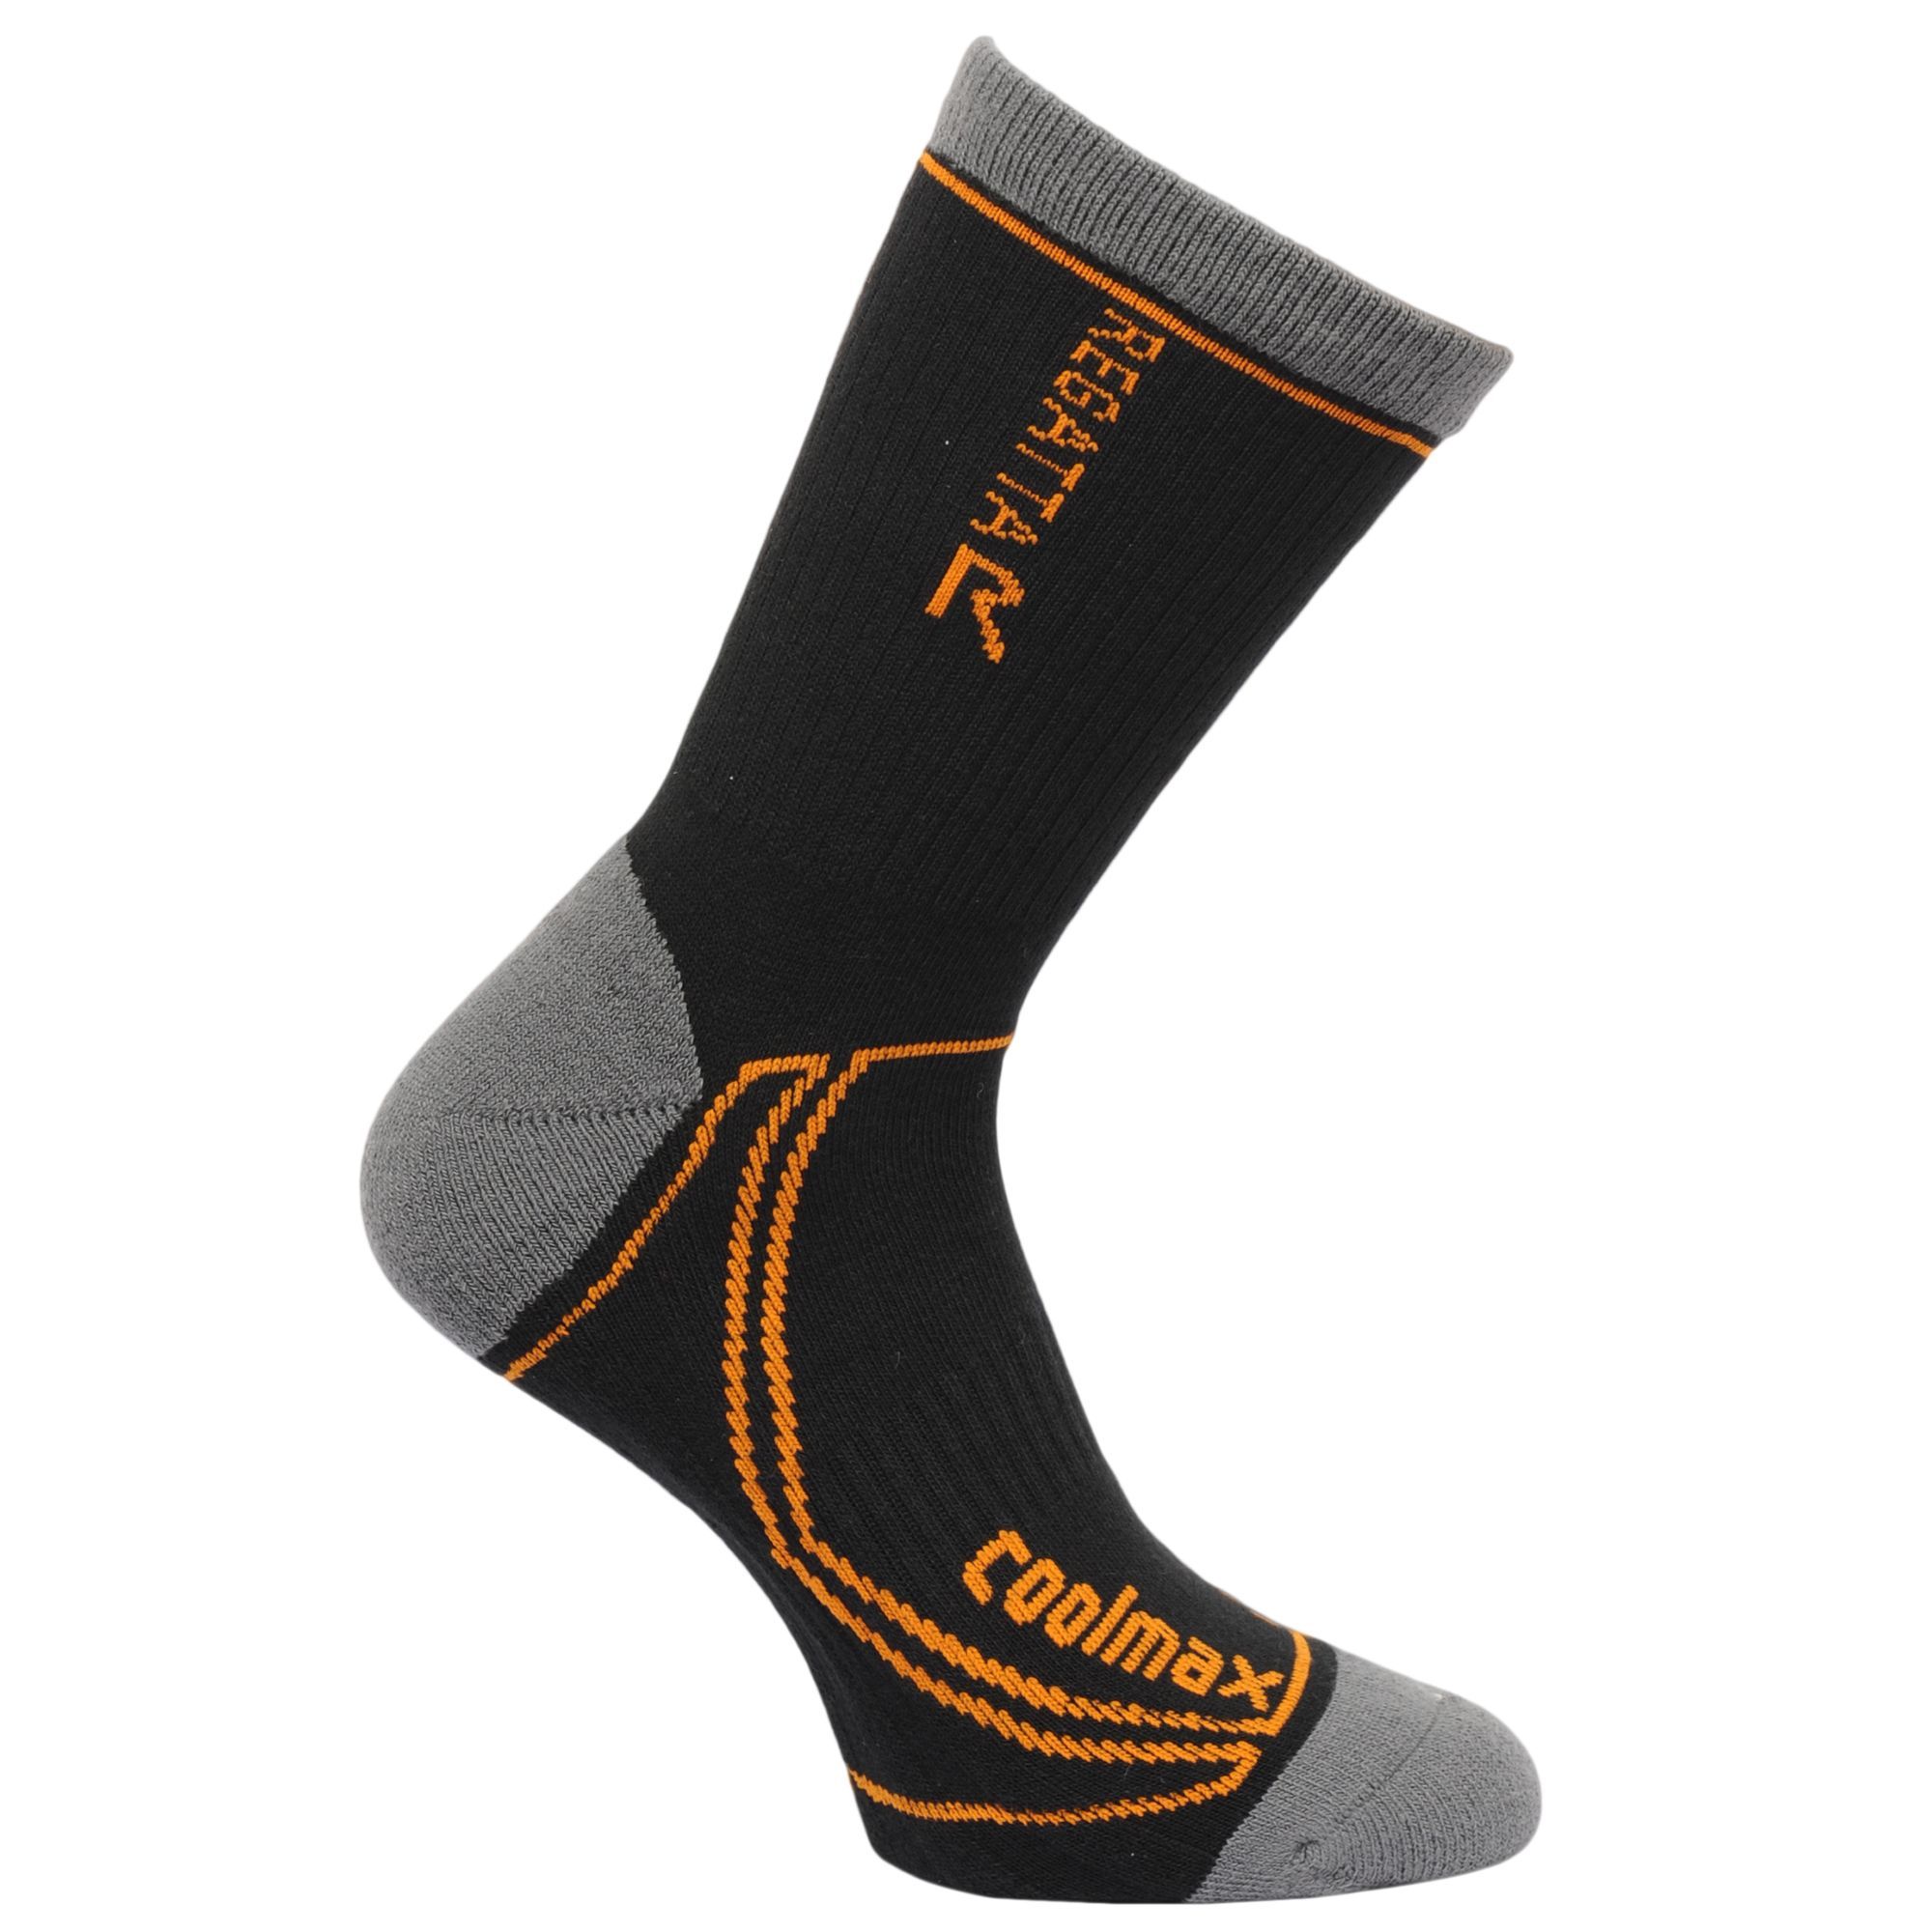 The mens Two Season Trek & Trail Sock is constructed with a high Coolmax percentage for exceptional moisture control. Strategic cushioning and reinforced areas prone to wear help keep feet happy all day long. 74% Coolmax, 23% Polyamide,  3% Elastane.